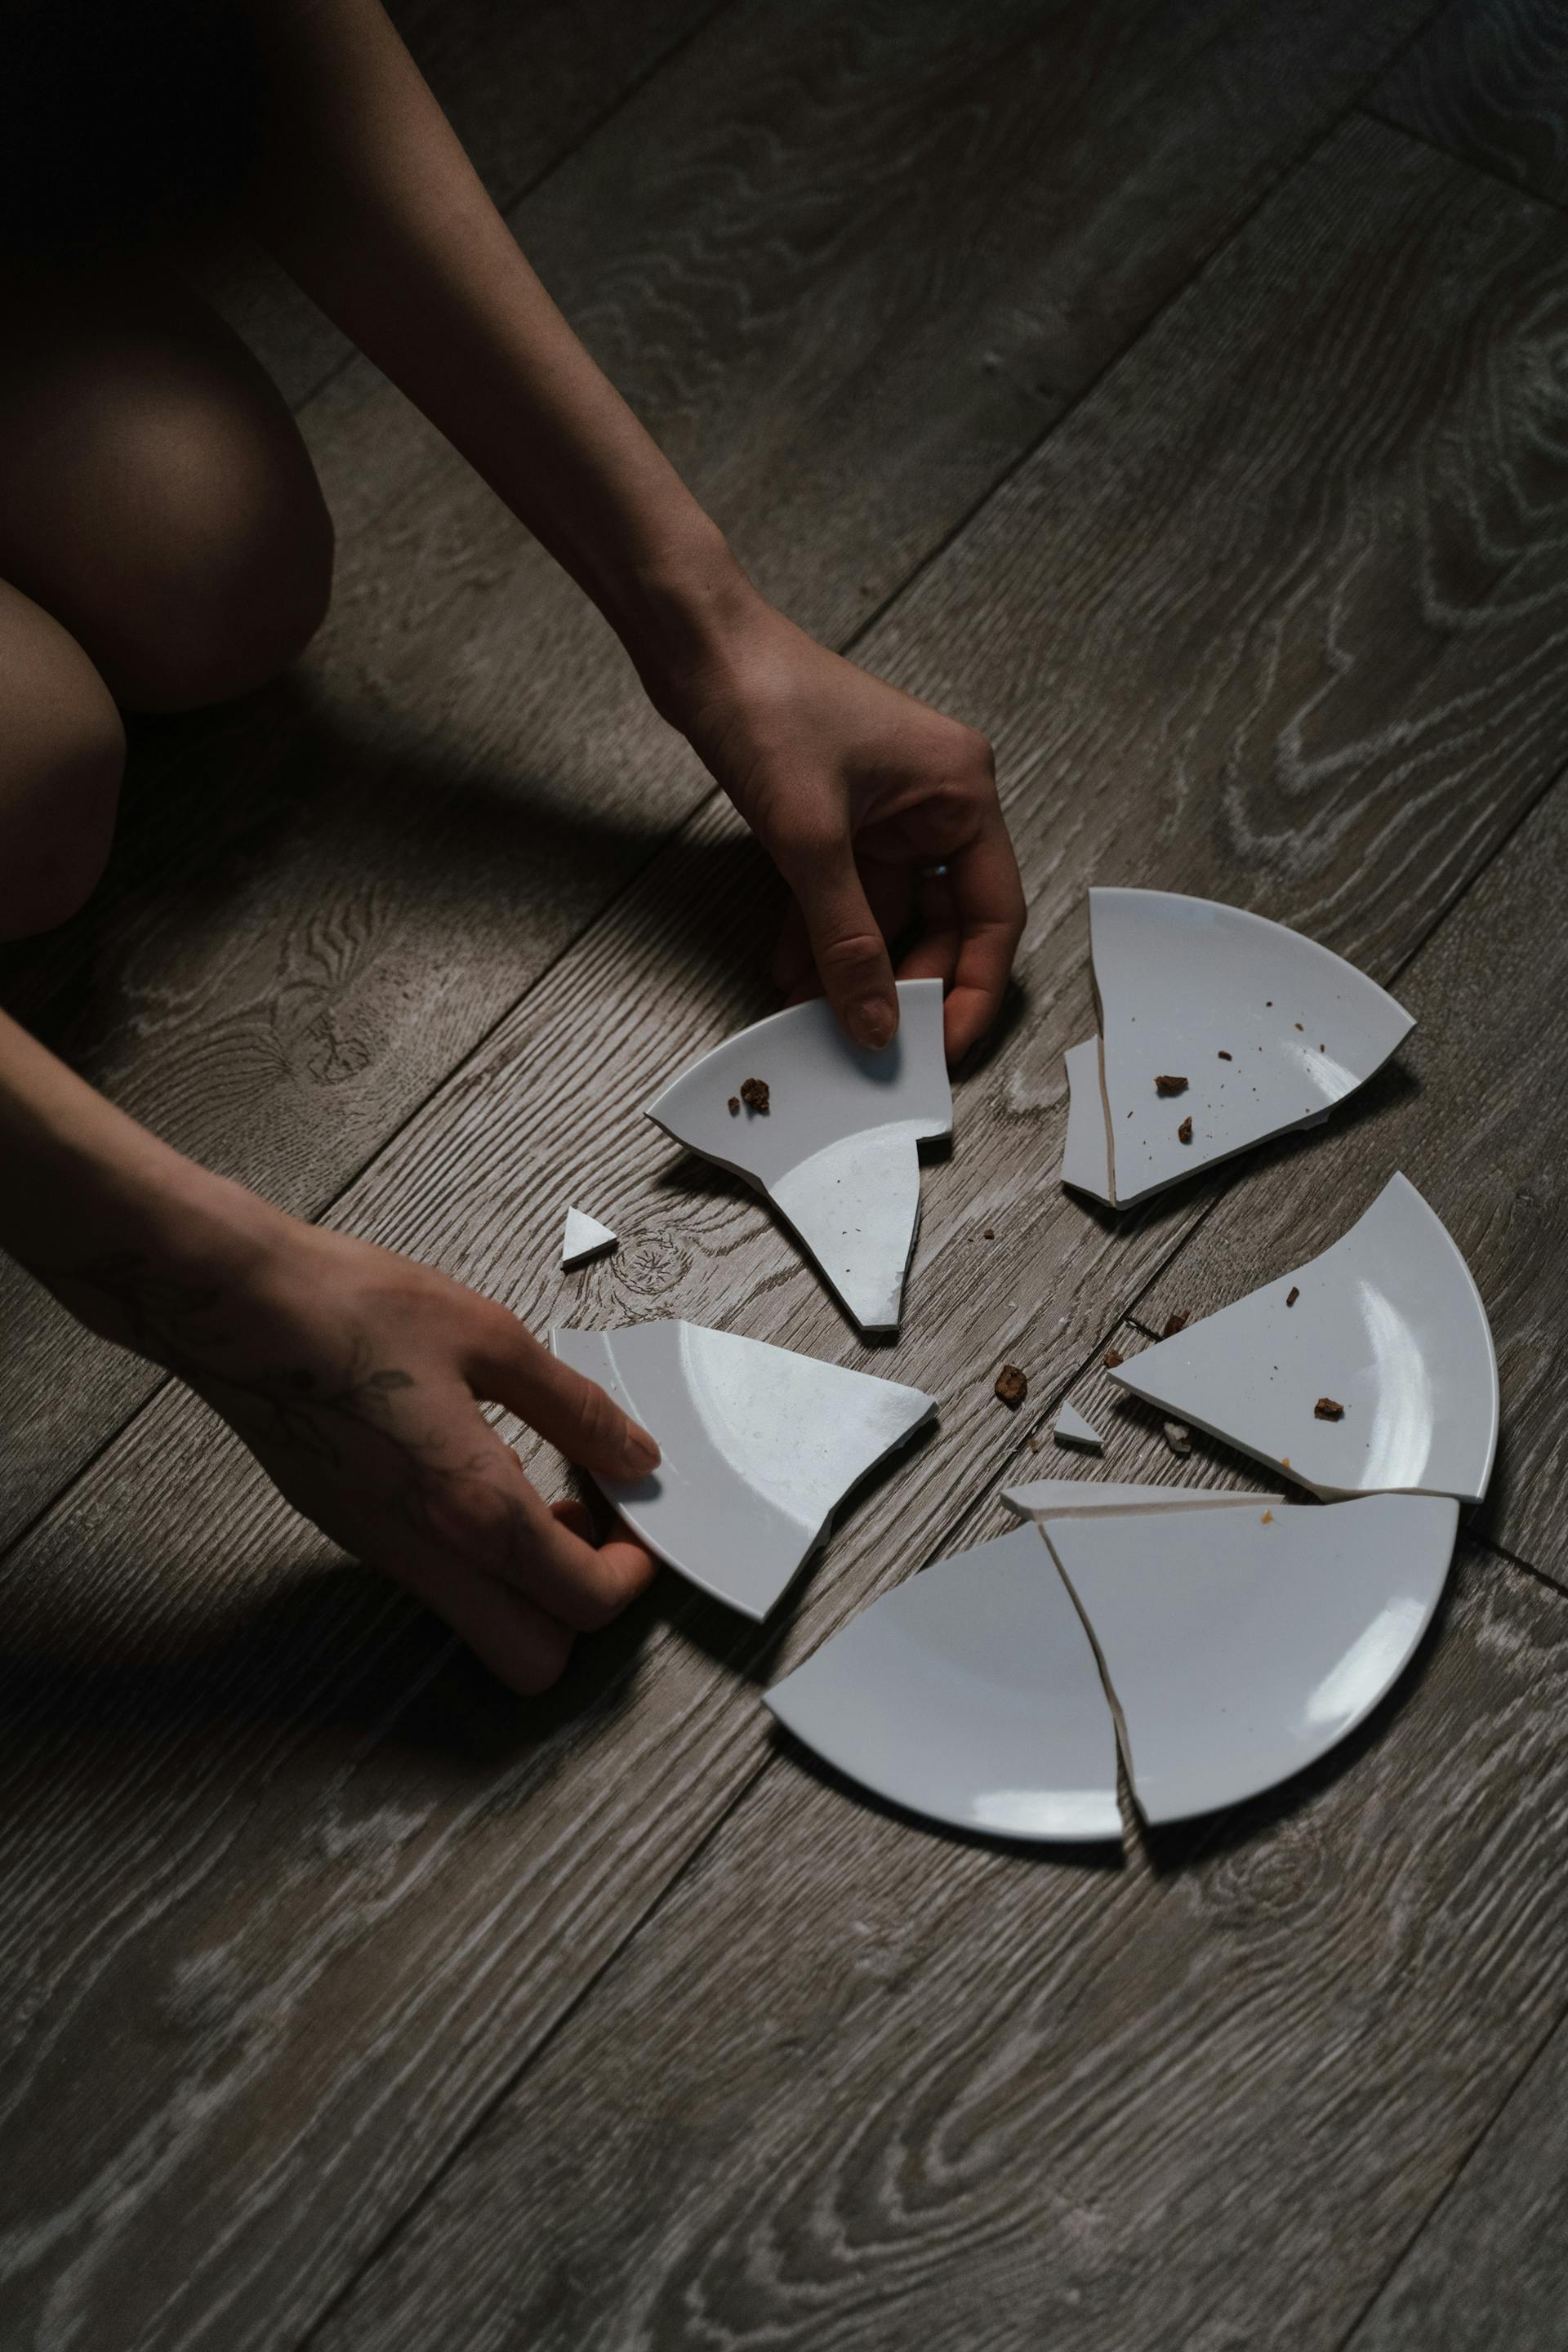 A shattered plate | Source: Pexels